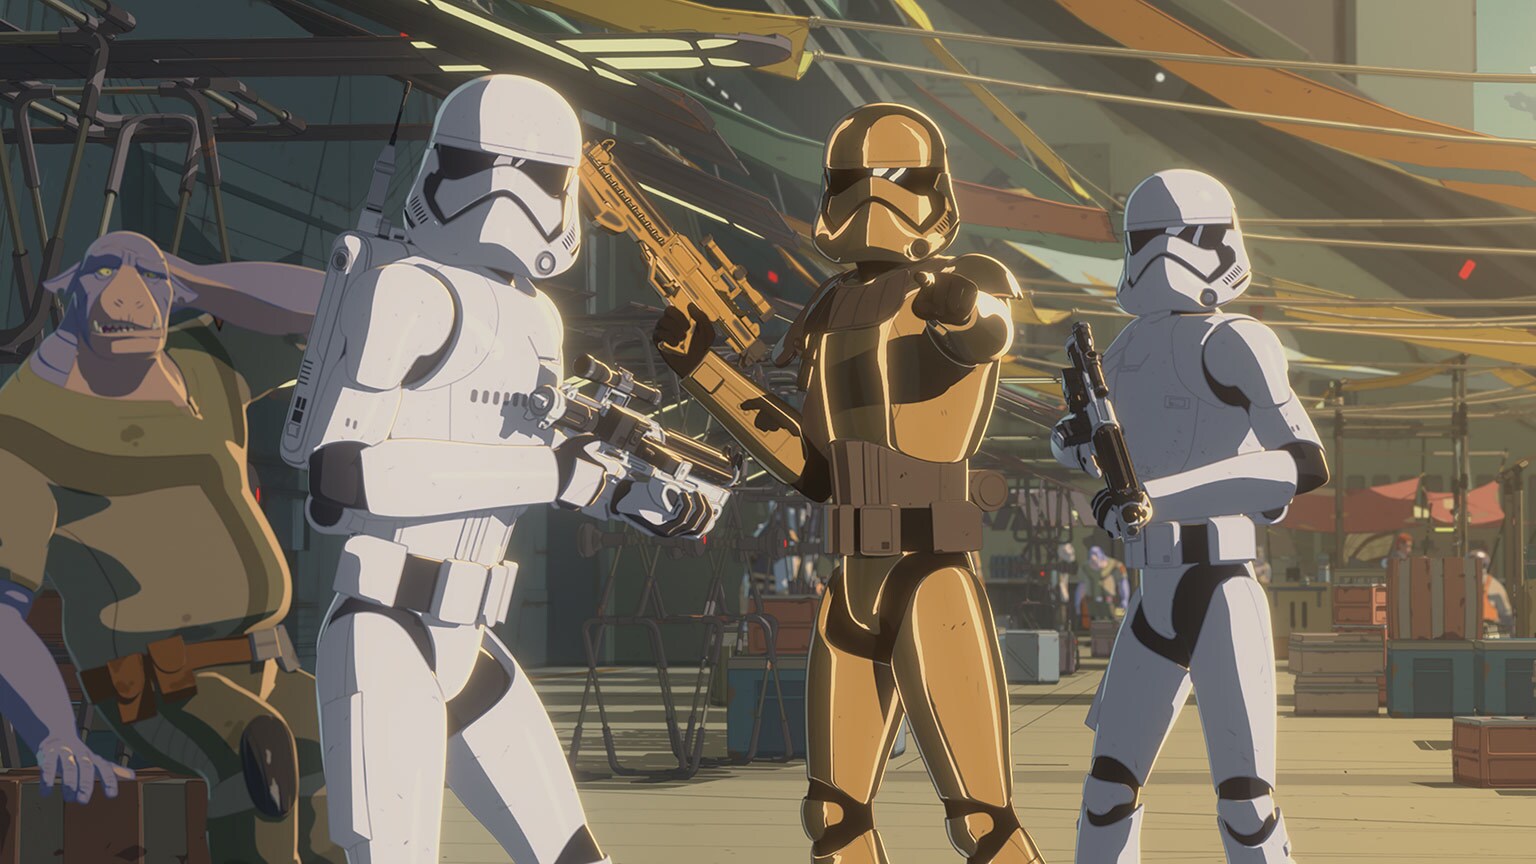 Bucket's List Extra: 8 Fun Facts from "The Children from Tehar" - Star Wars Resistance